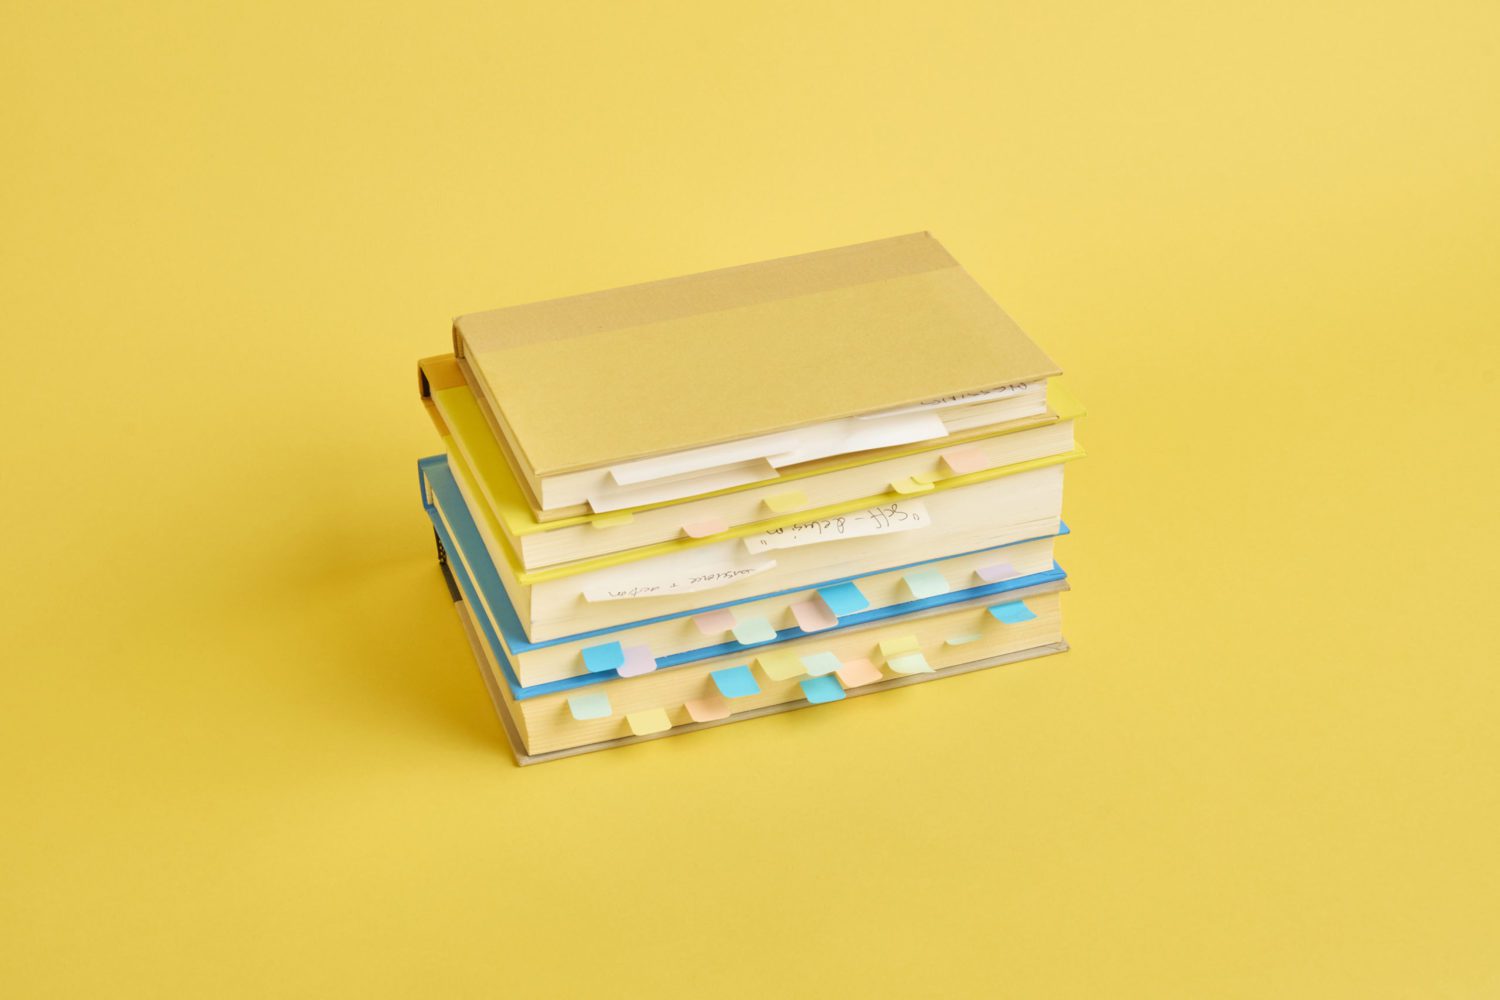 Stack of books with page markers on yellow background